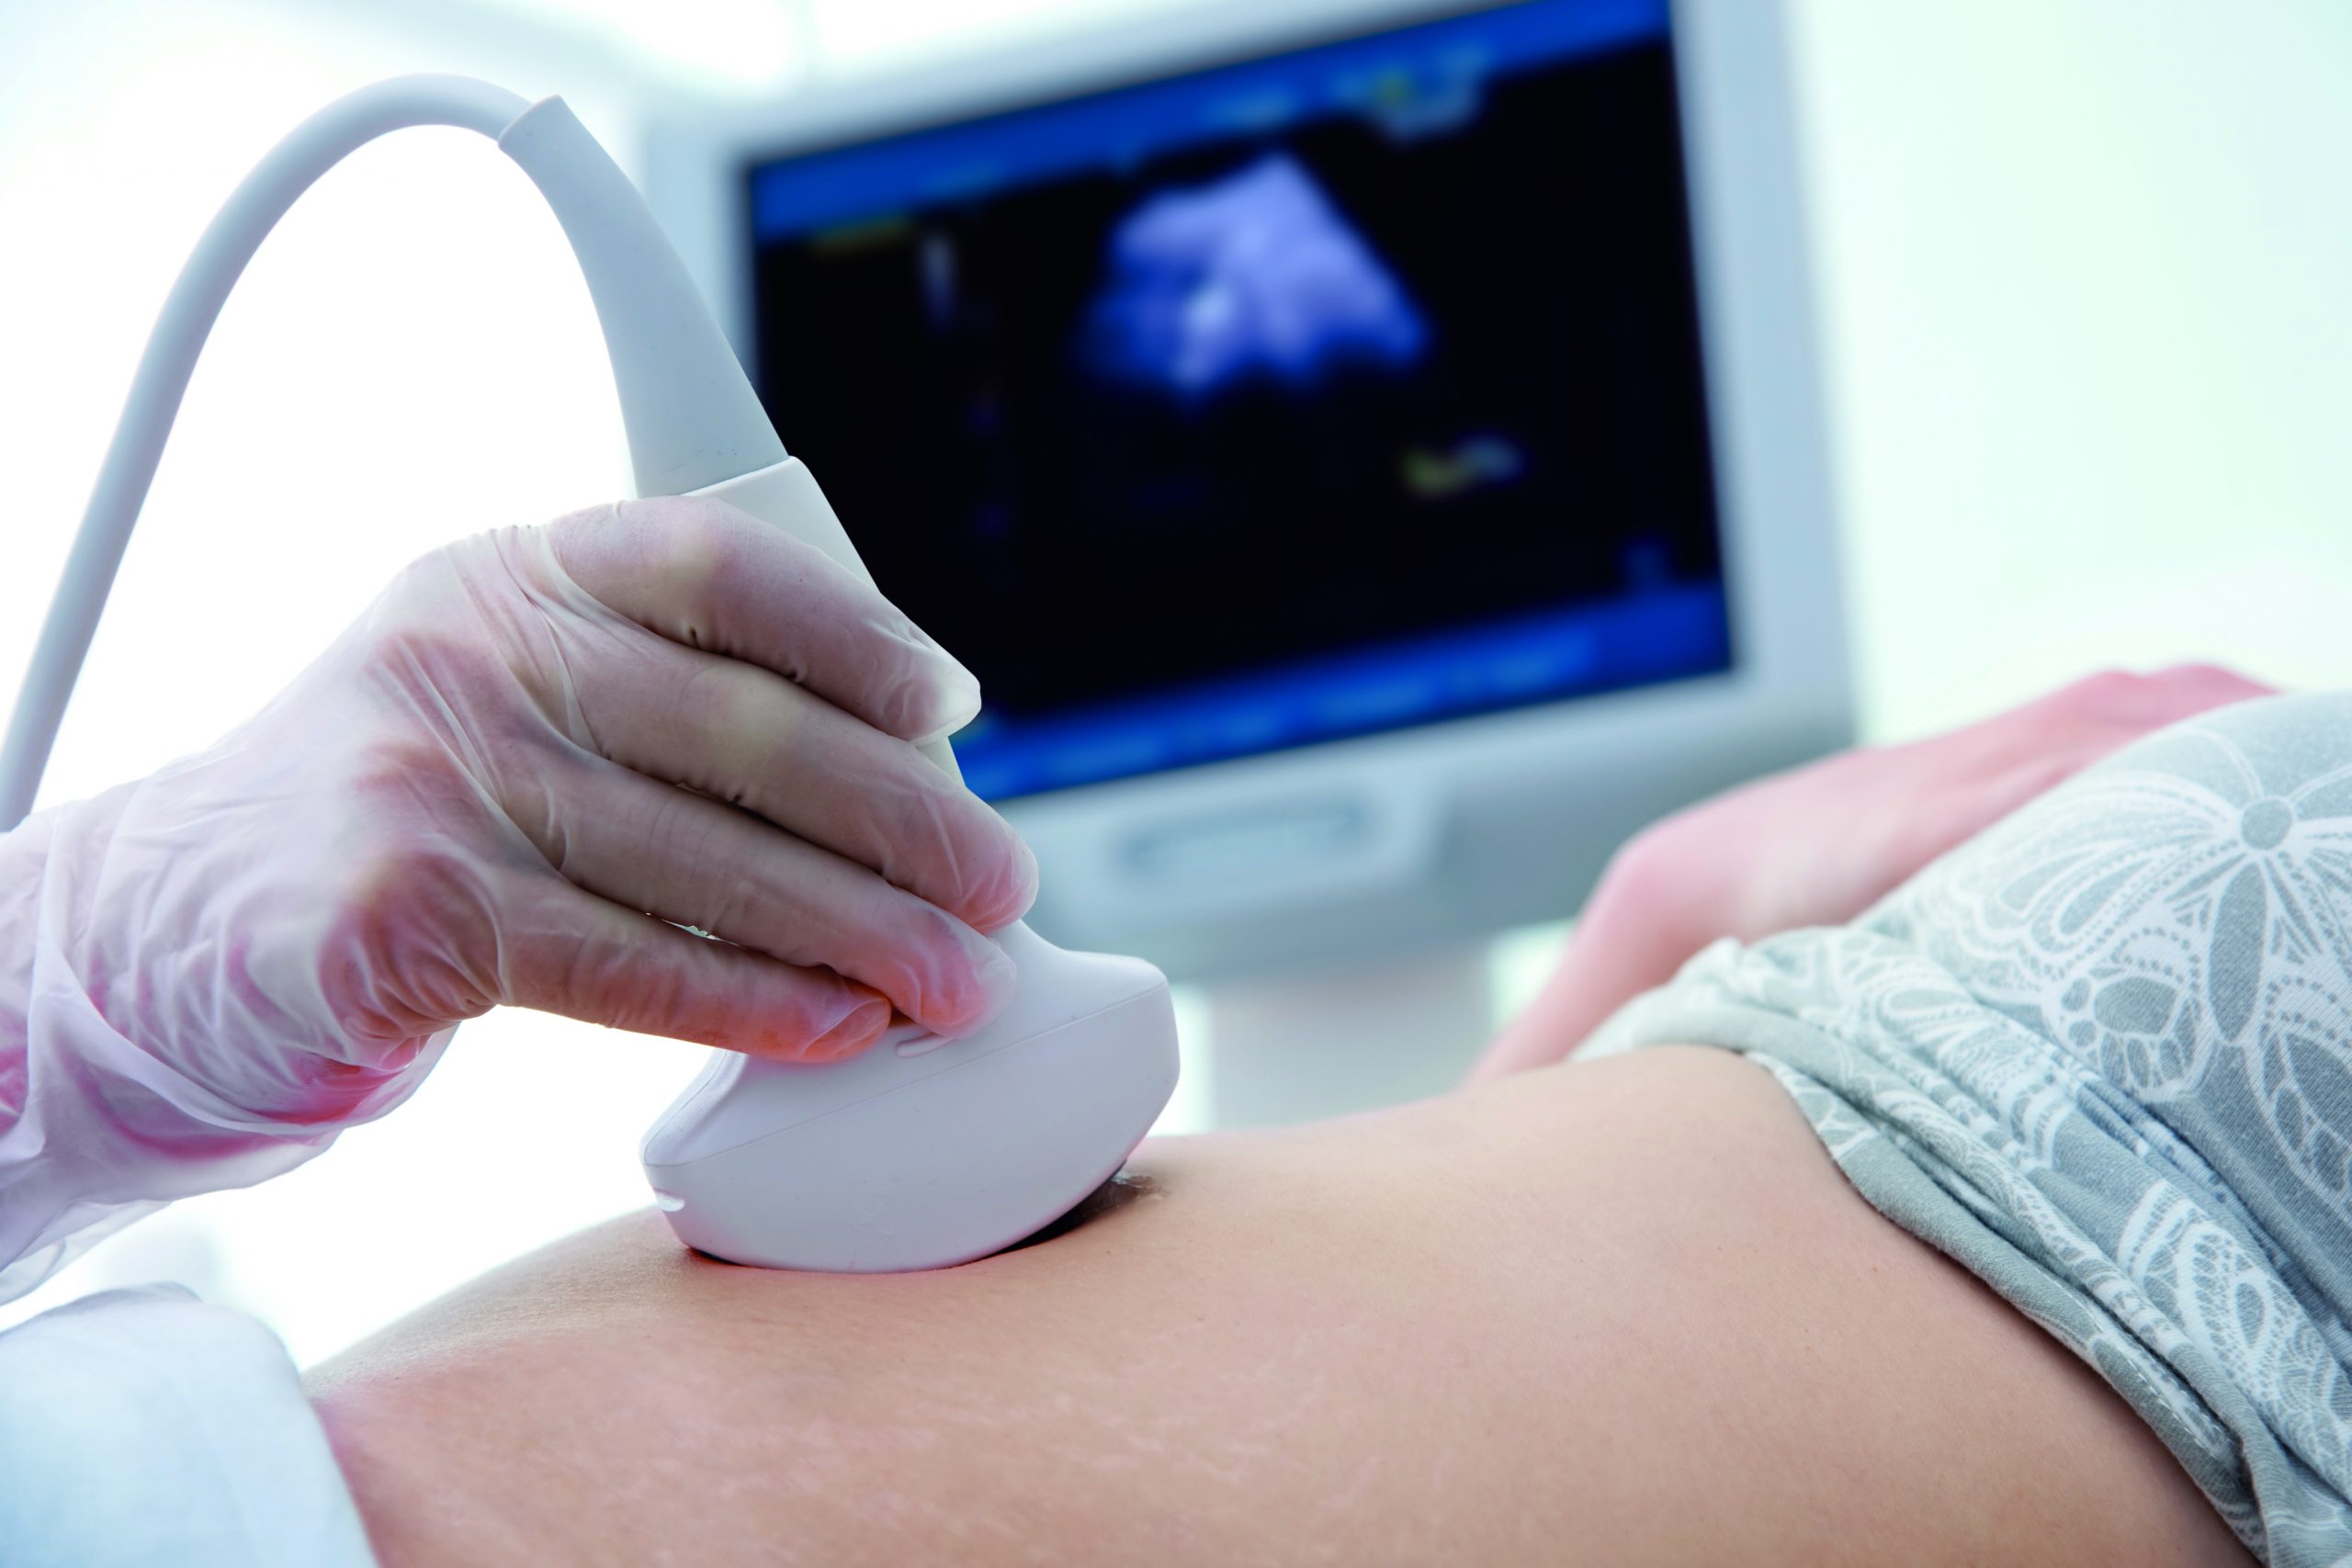 Obstetric Scanning: The role of ultrasound in first trimester screening